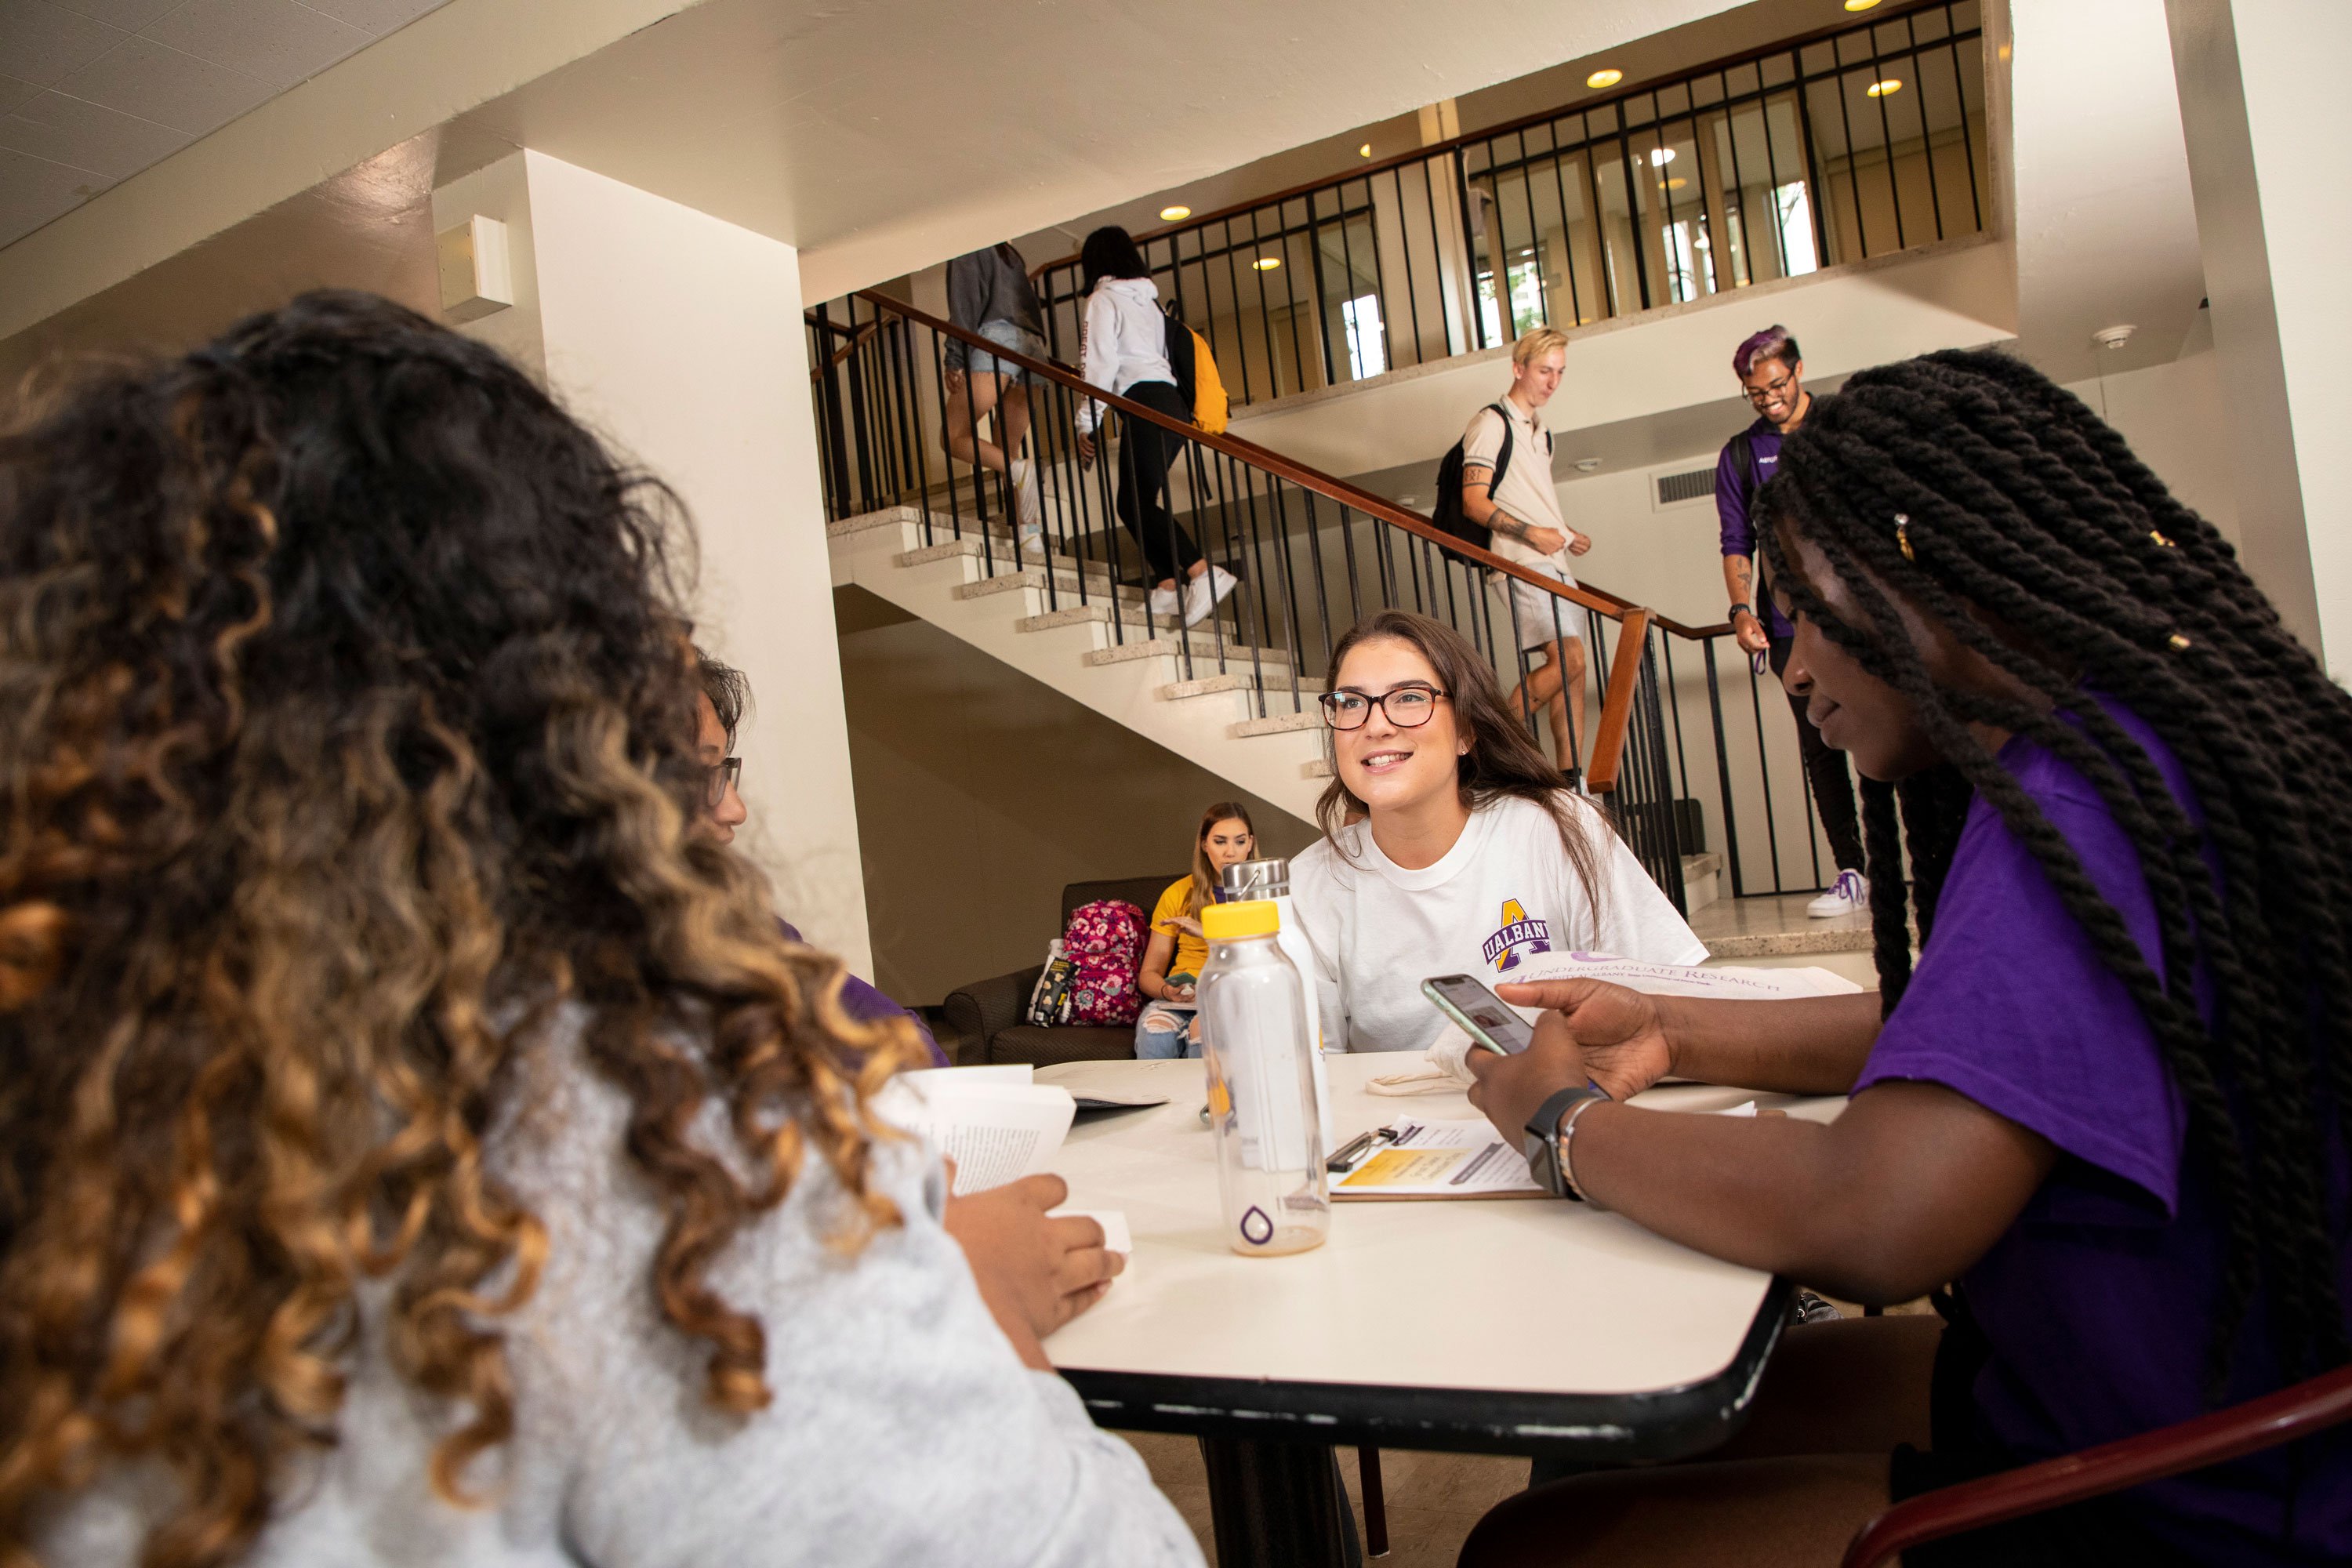 A student smiles as she talks to three other friends seated at a table with her. Other students walk through the residence hall and up its stairs.